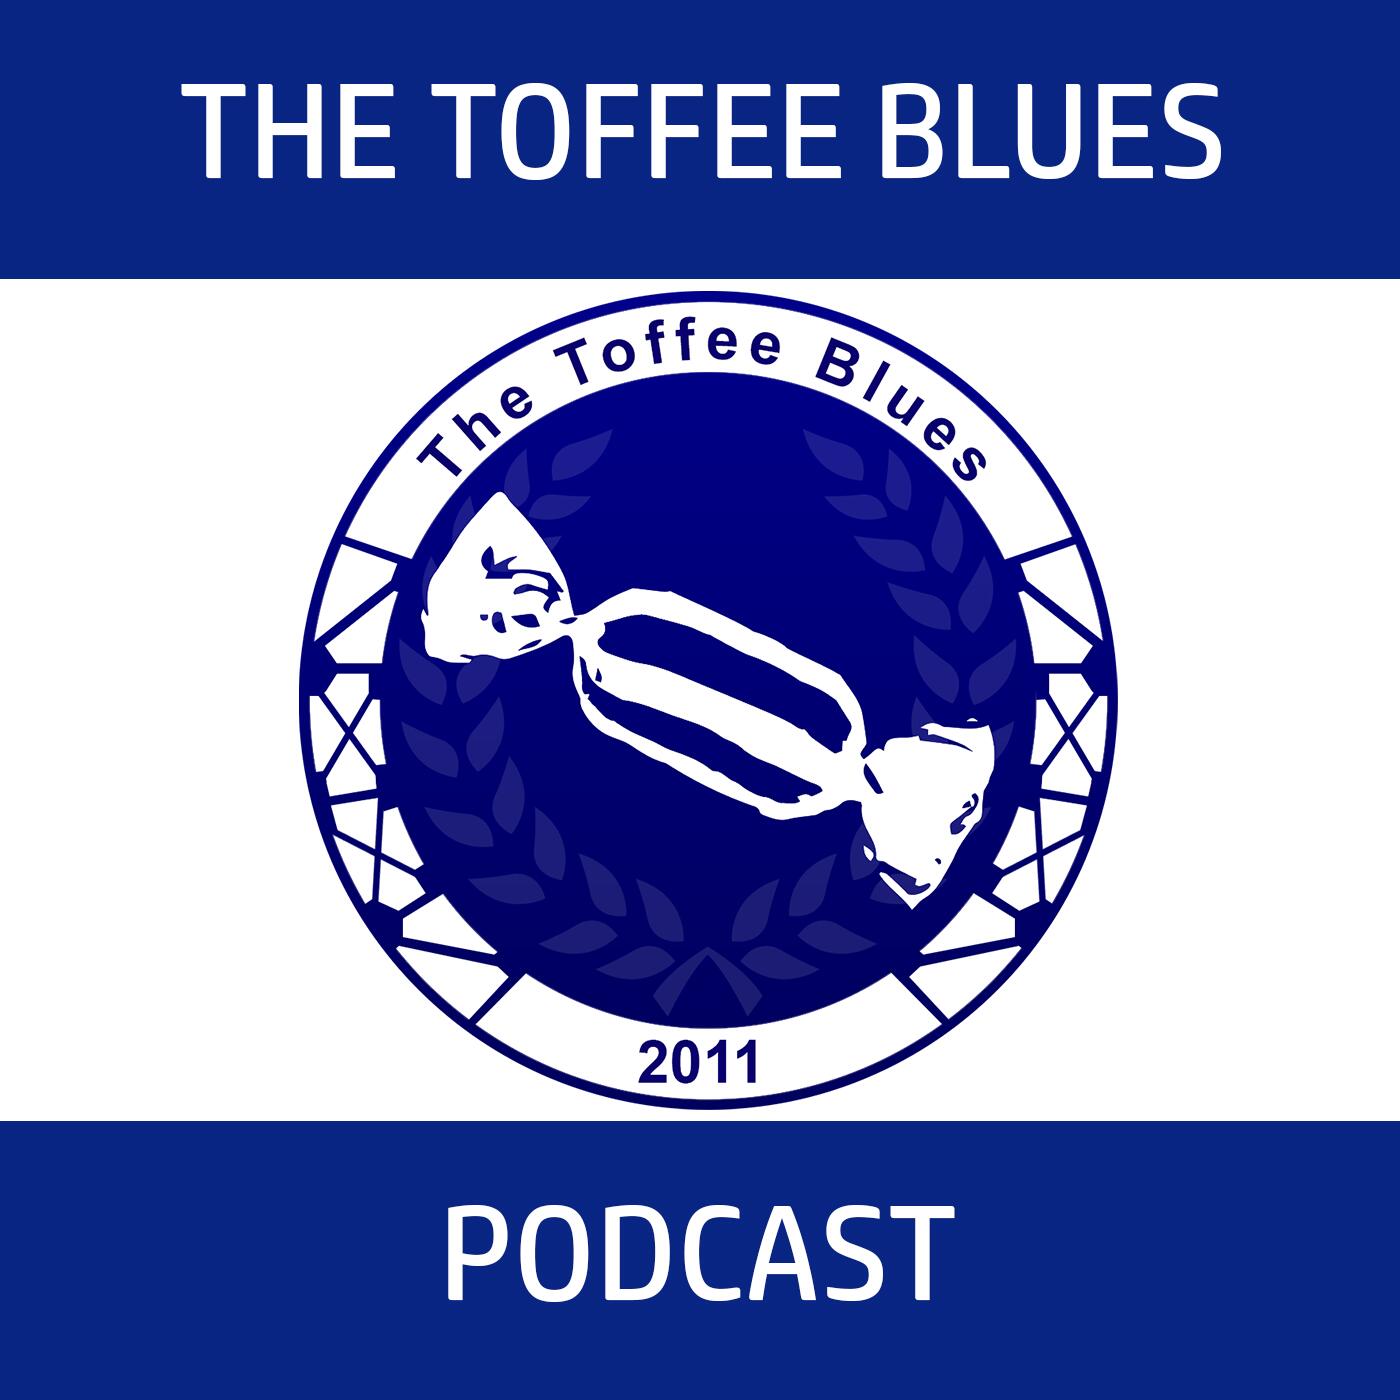 Blue Podcast. The Toffees группа. Blues support